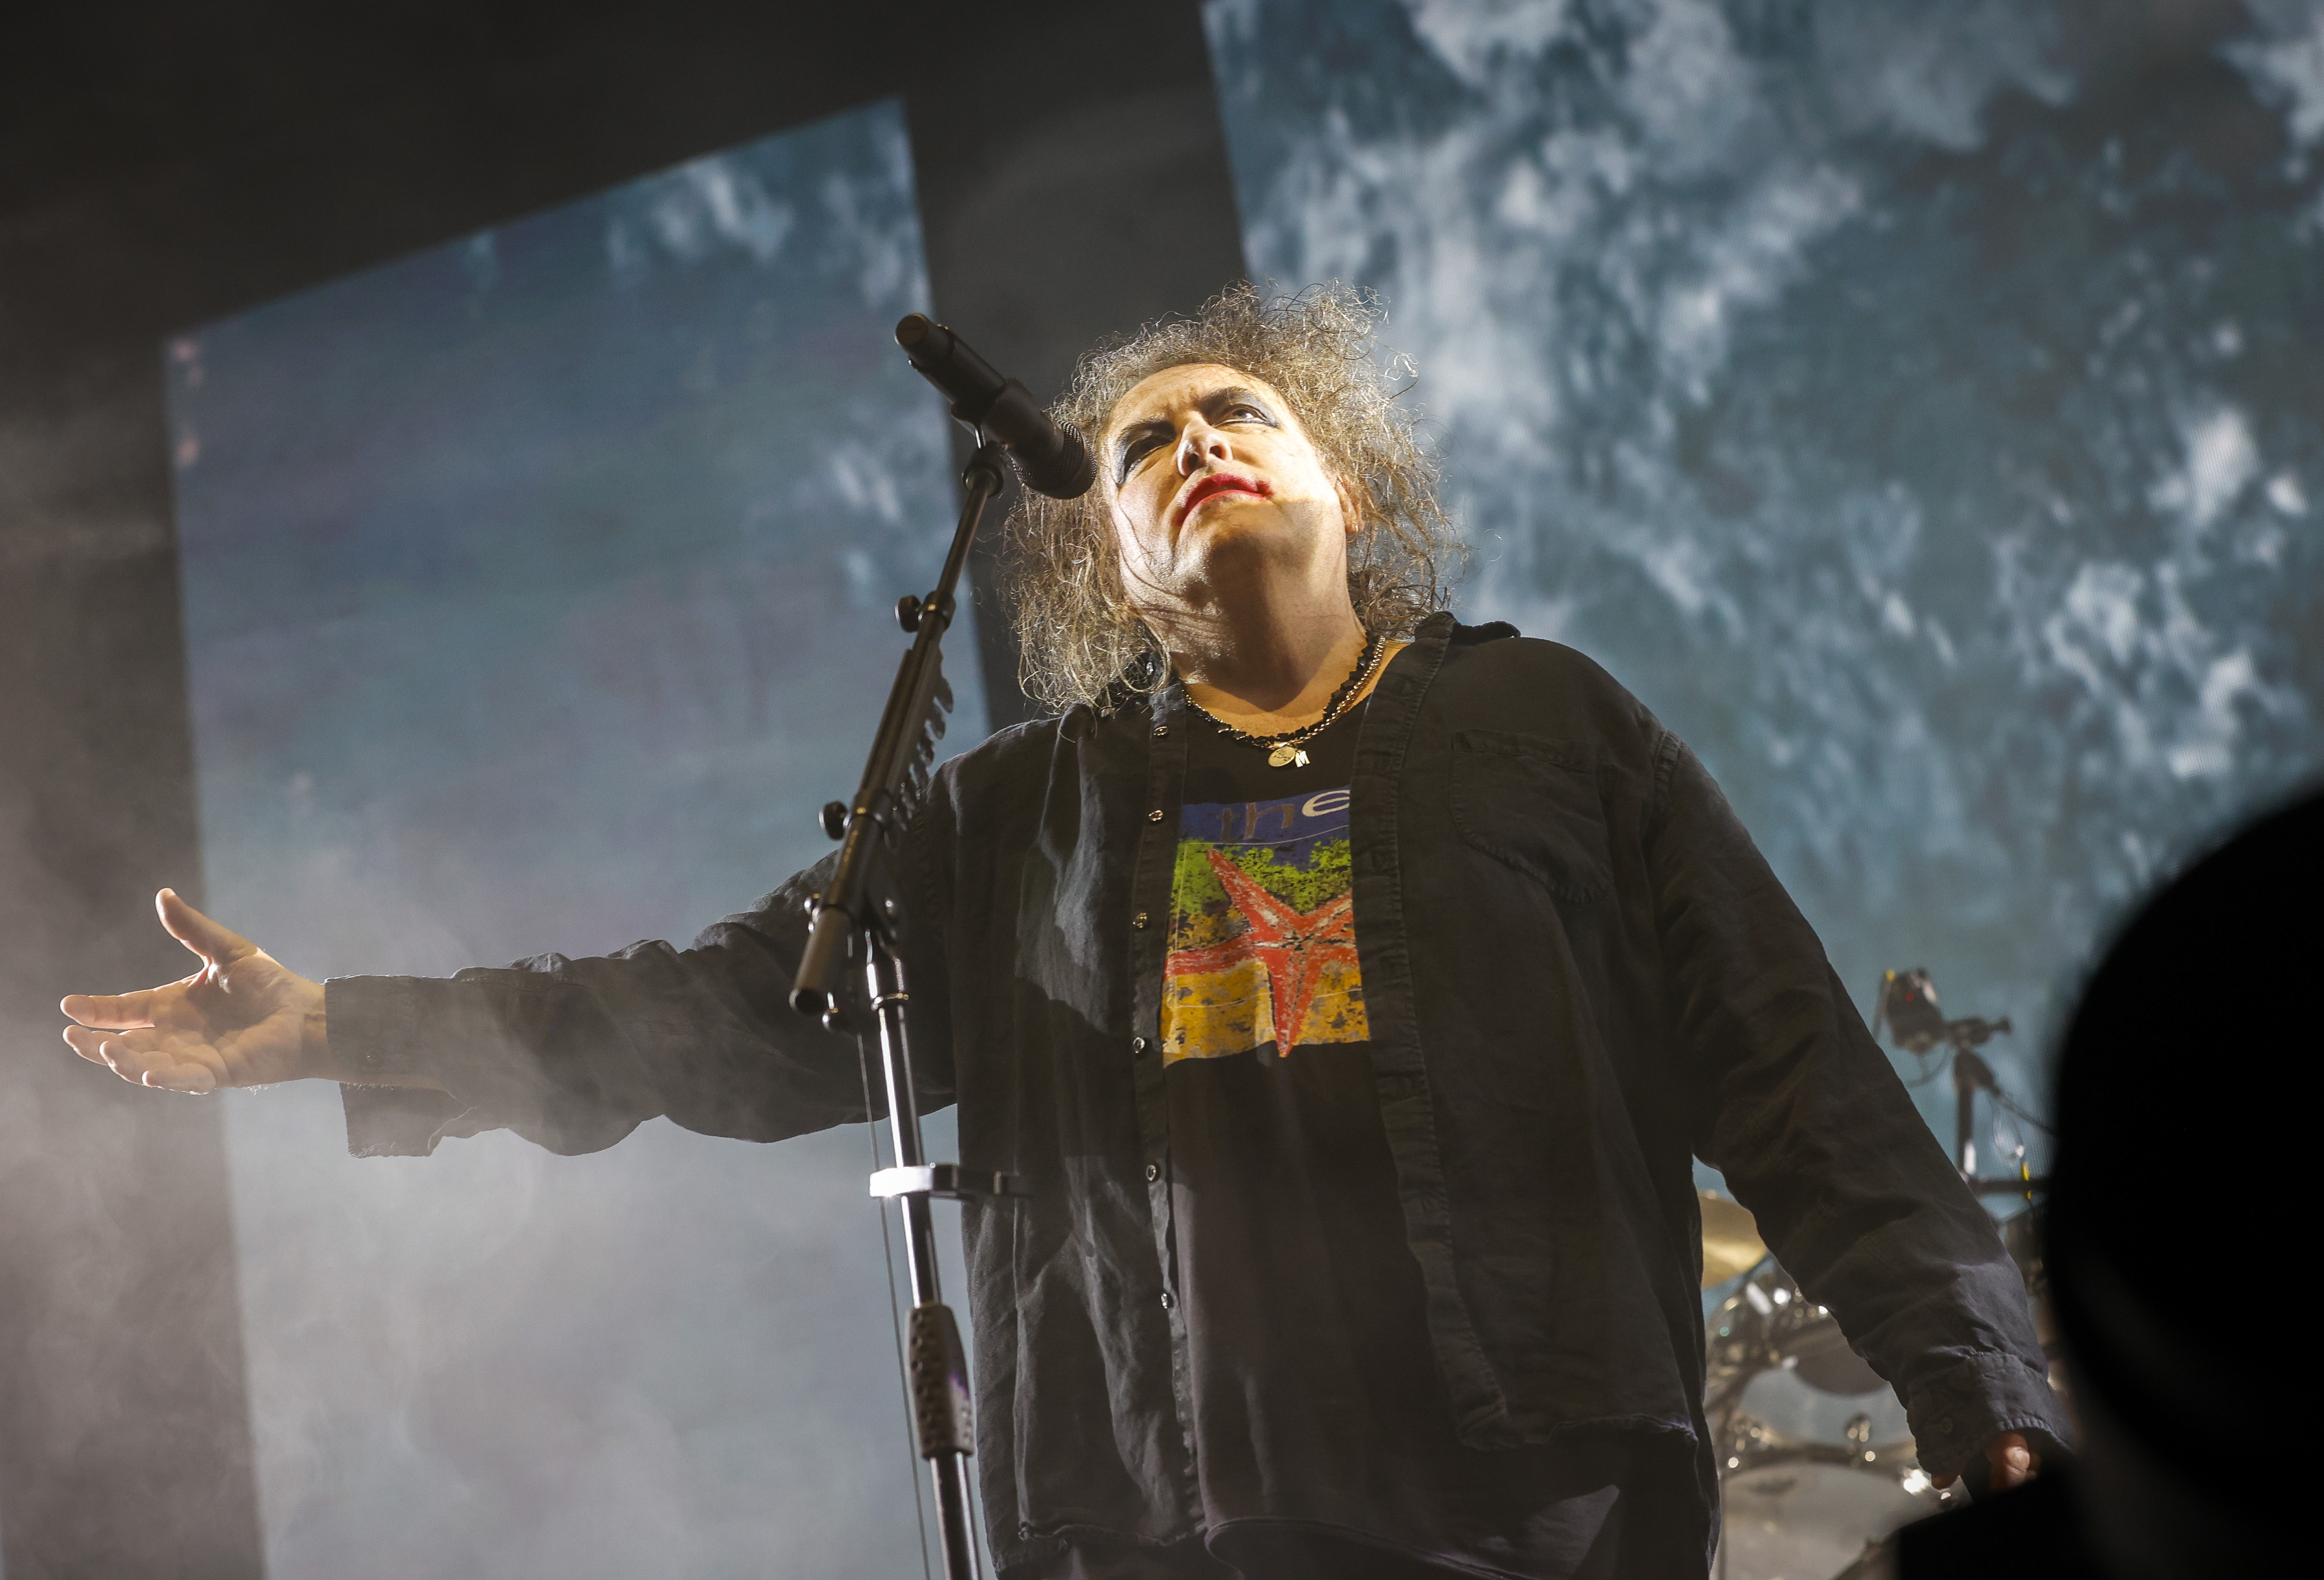 Review: The Cure's return to Tampa delivers haunting songs new and old